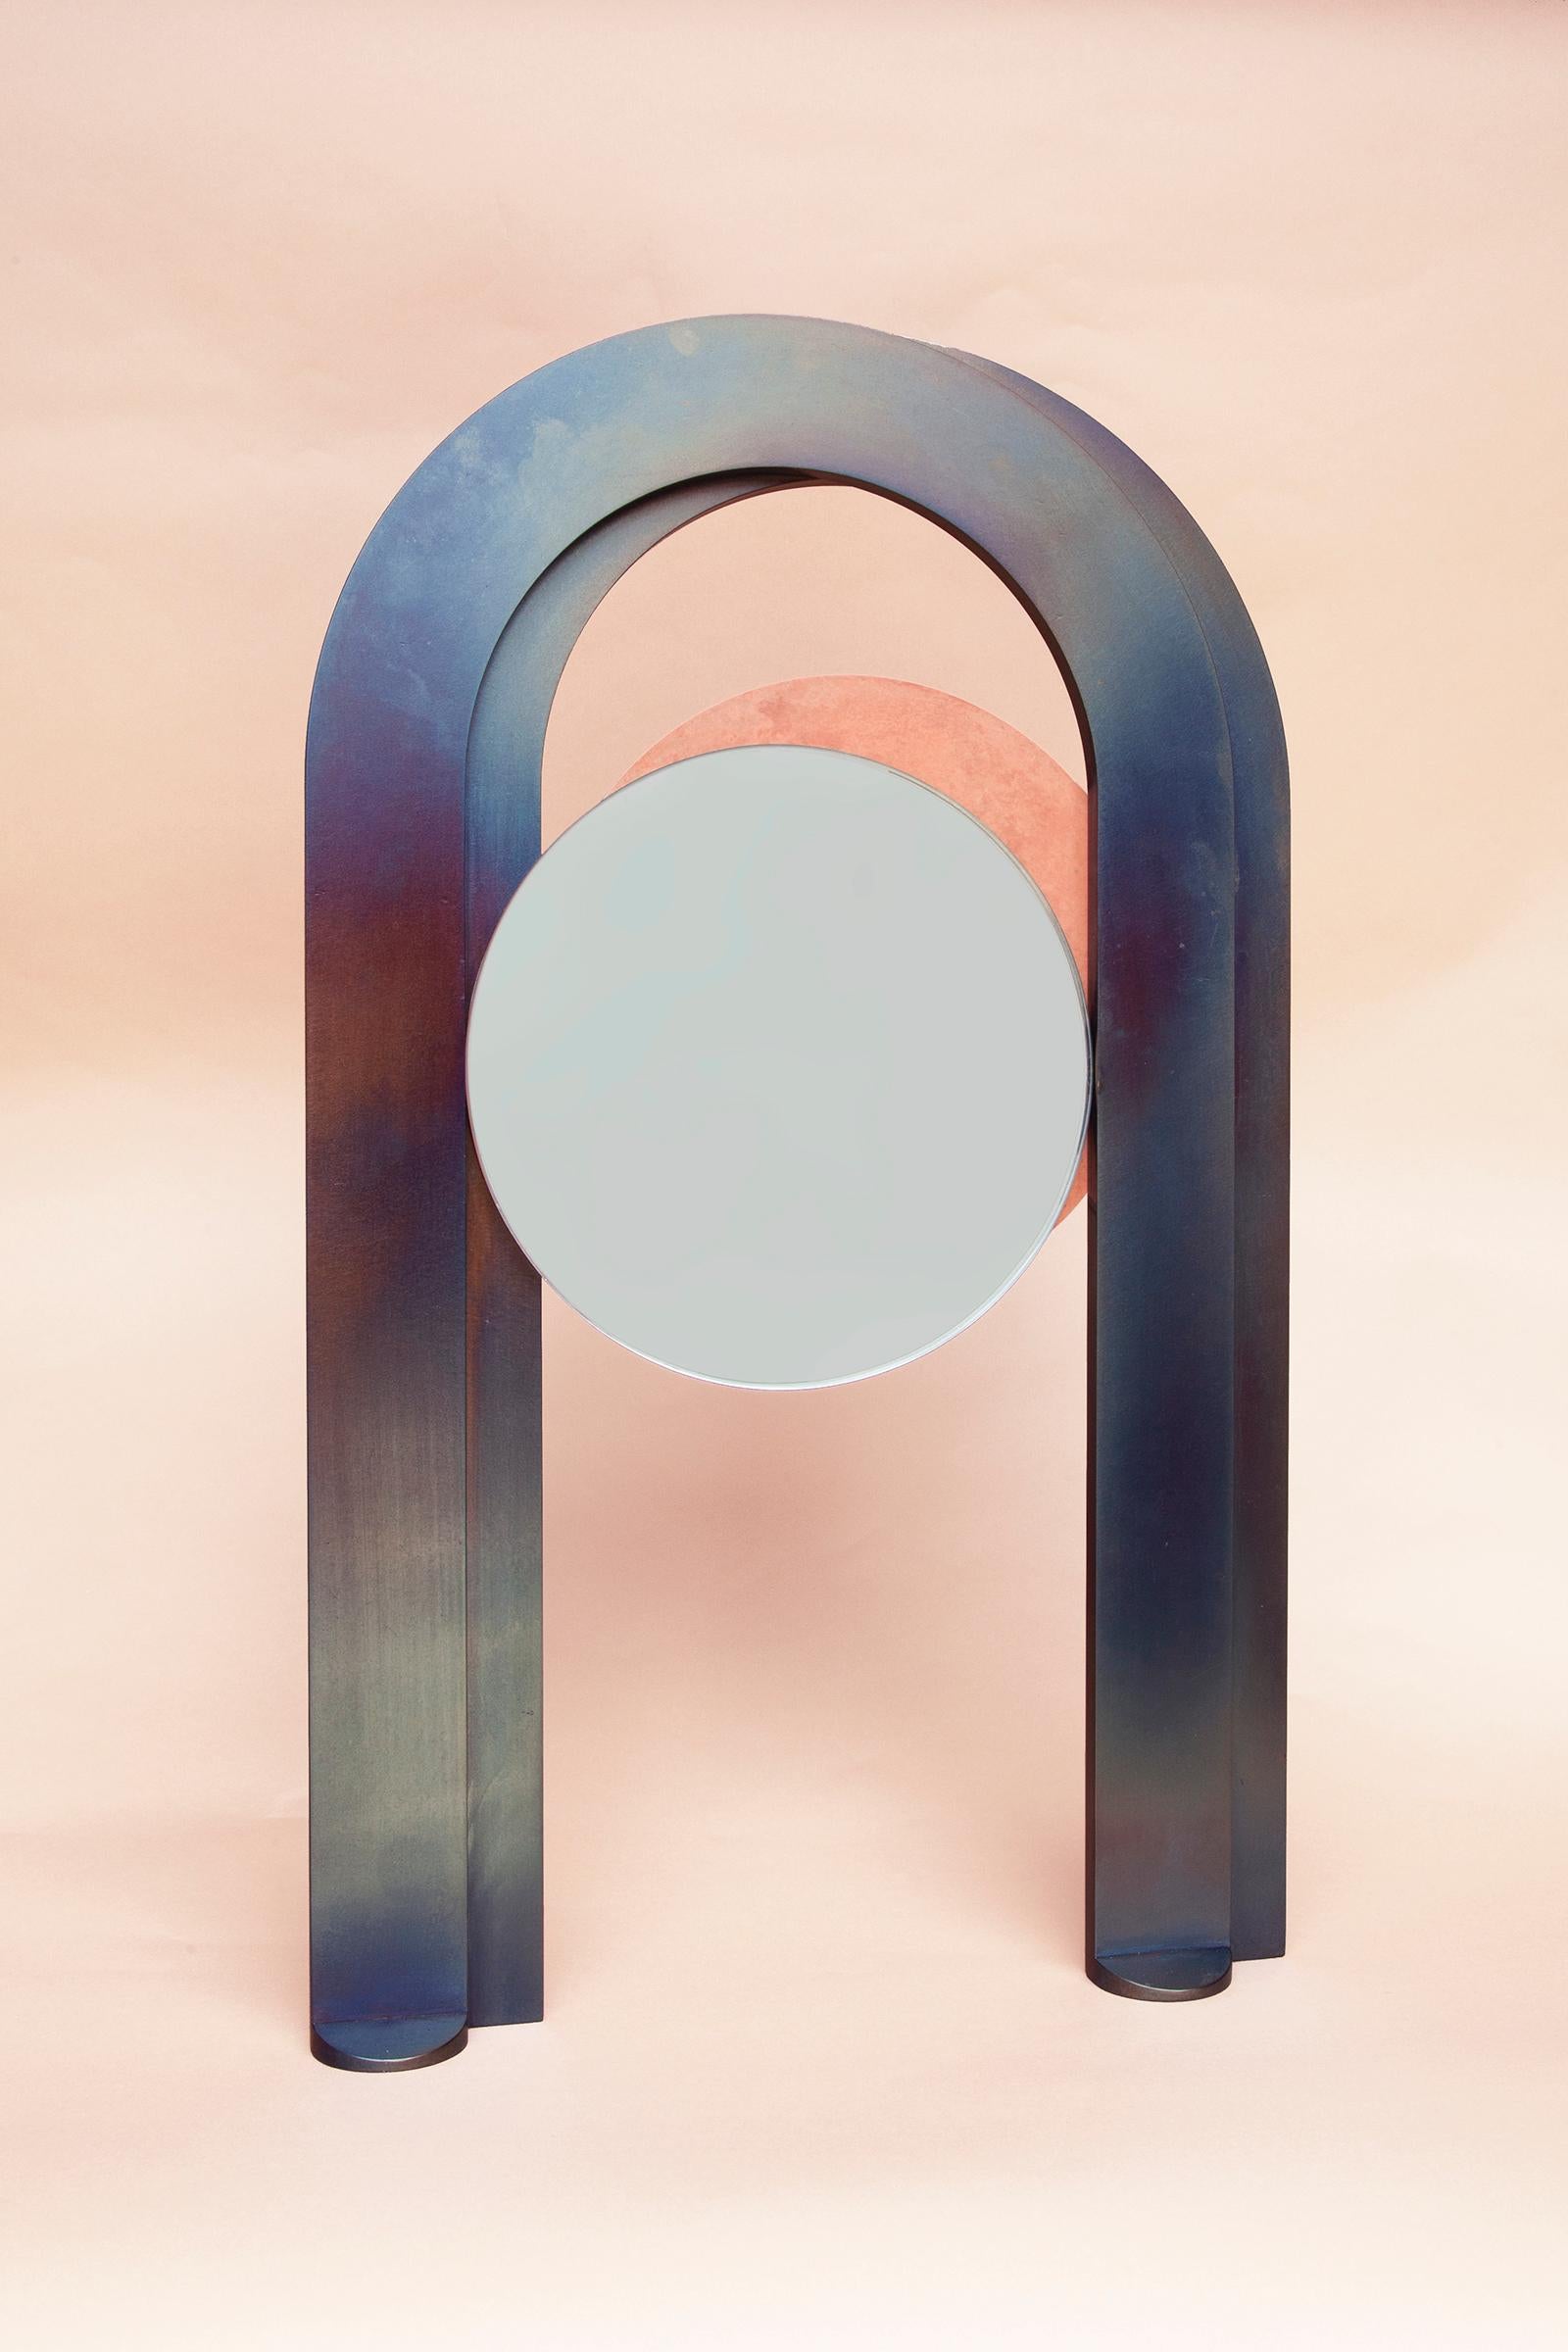 A pair of offset tempered steel arches frame two eclipsing mirrors, shifting to reveal textured patina plates. Like two intersecting celestial bodies, the partnered mirrors suspend delicately within their frame leaving space for the gaze to travel